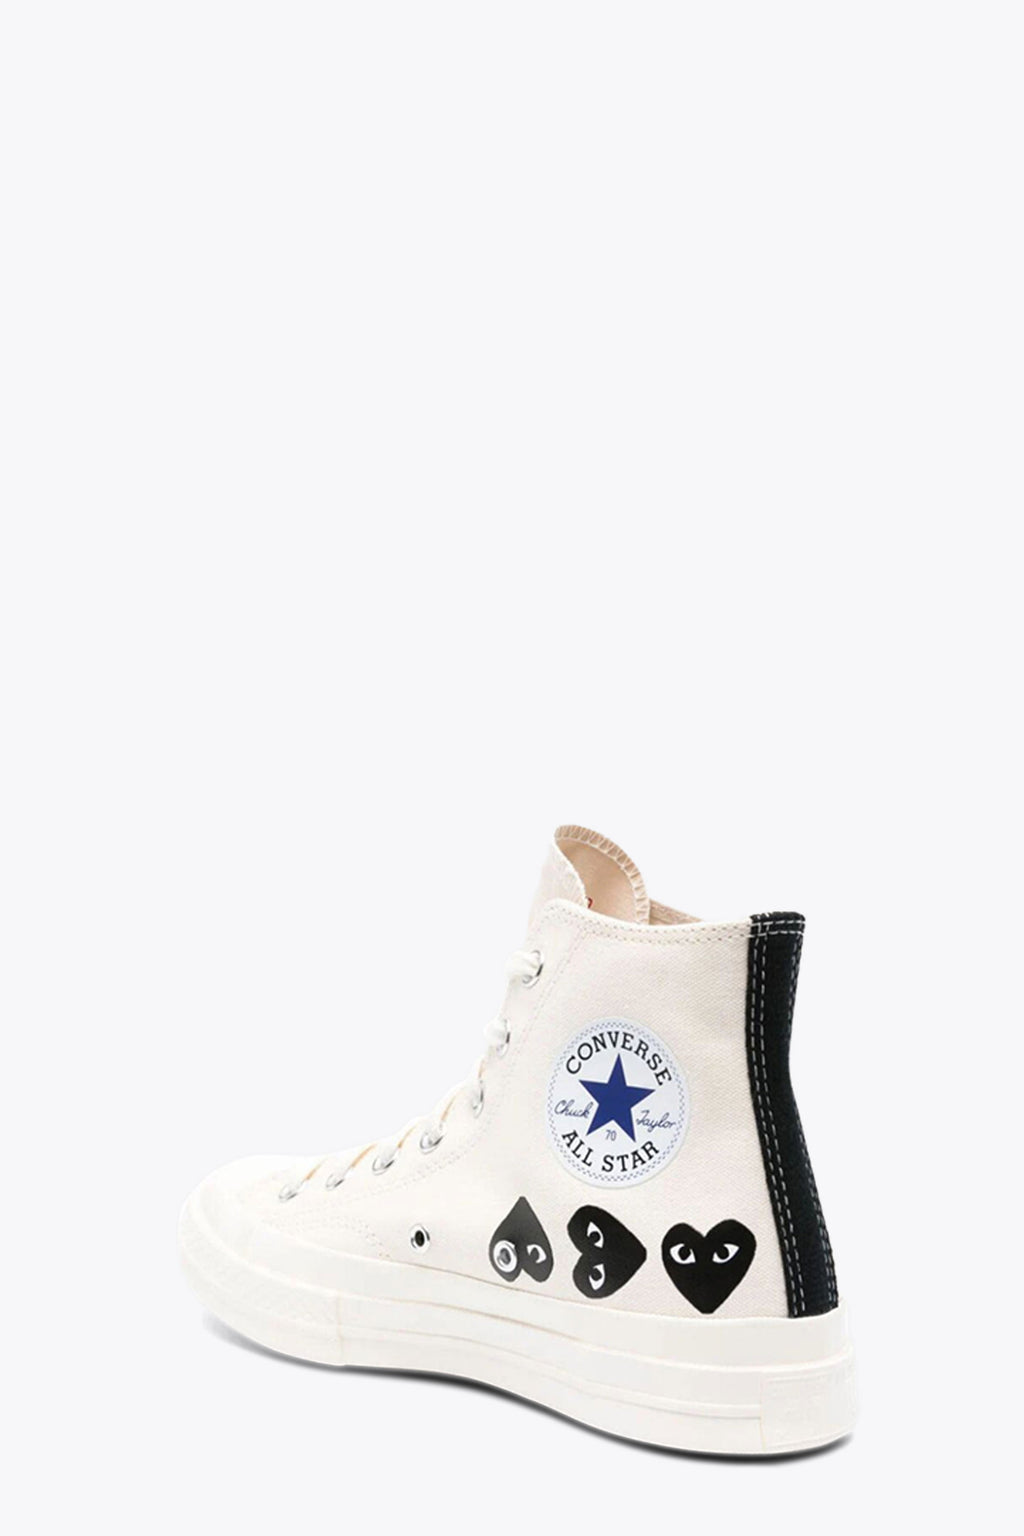 alt-image__Converse-collaboration-Chuck-Taylor-70's-off-white-canvas-high-sneaker